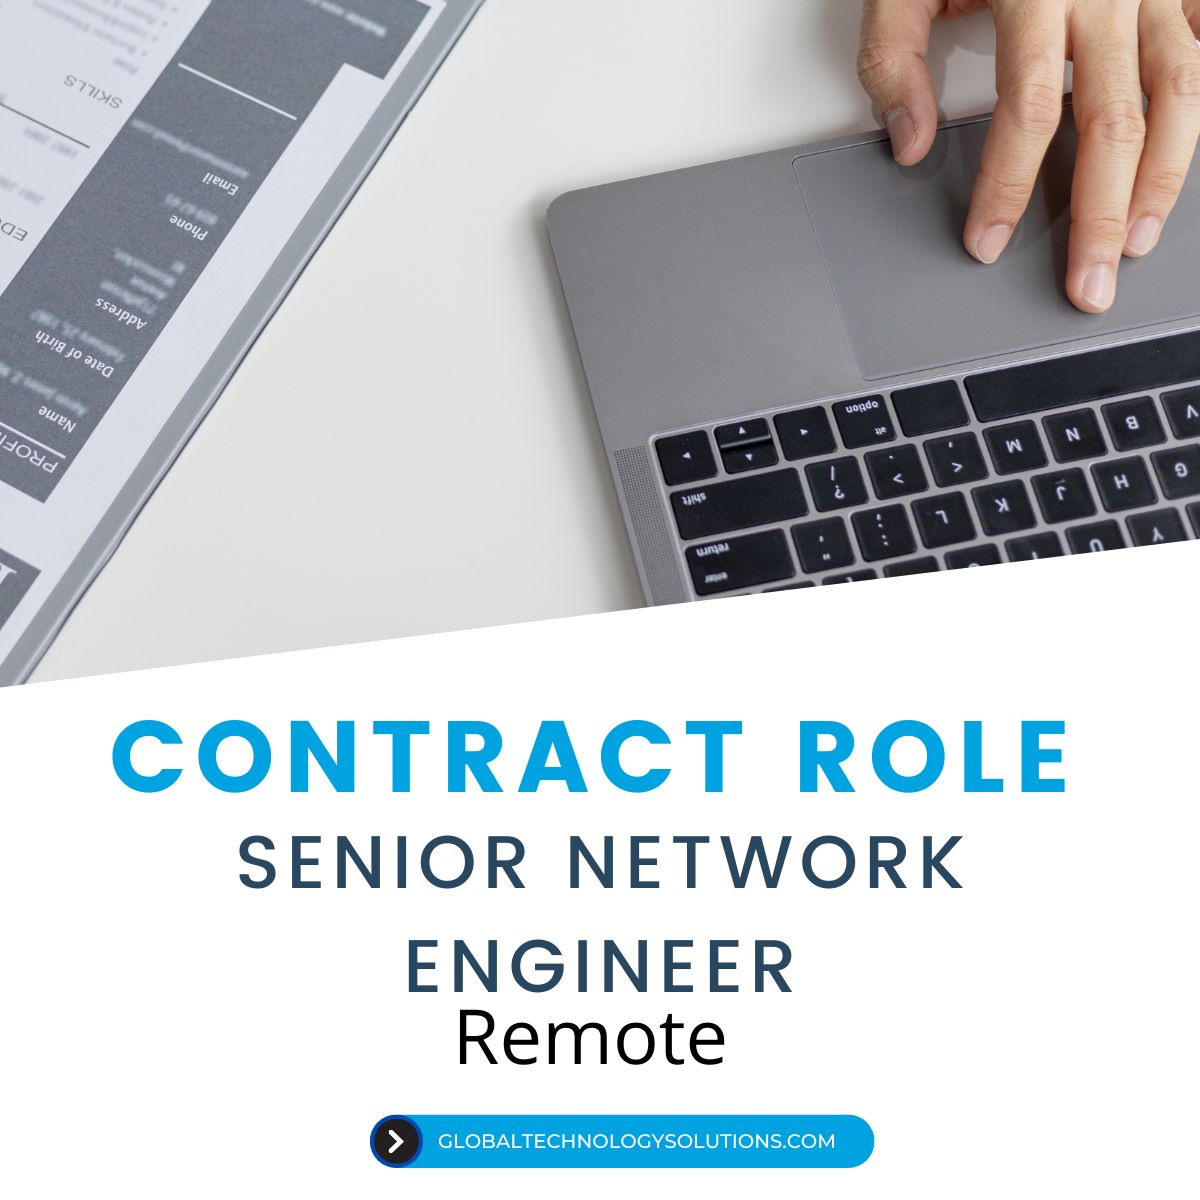 Remote Contract jobs image from GTS